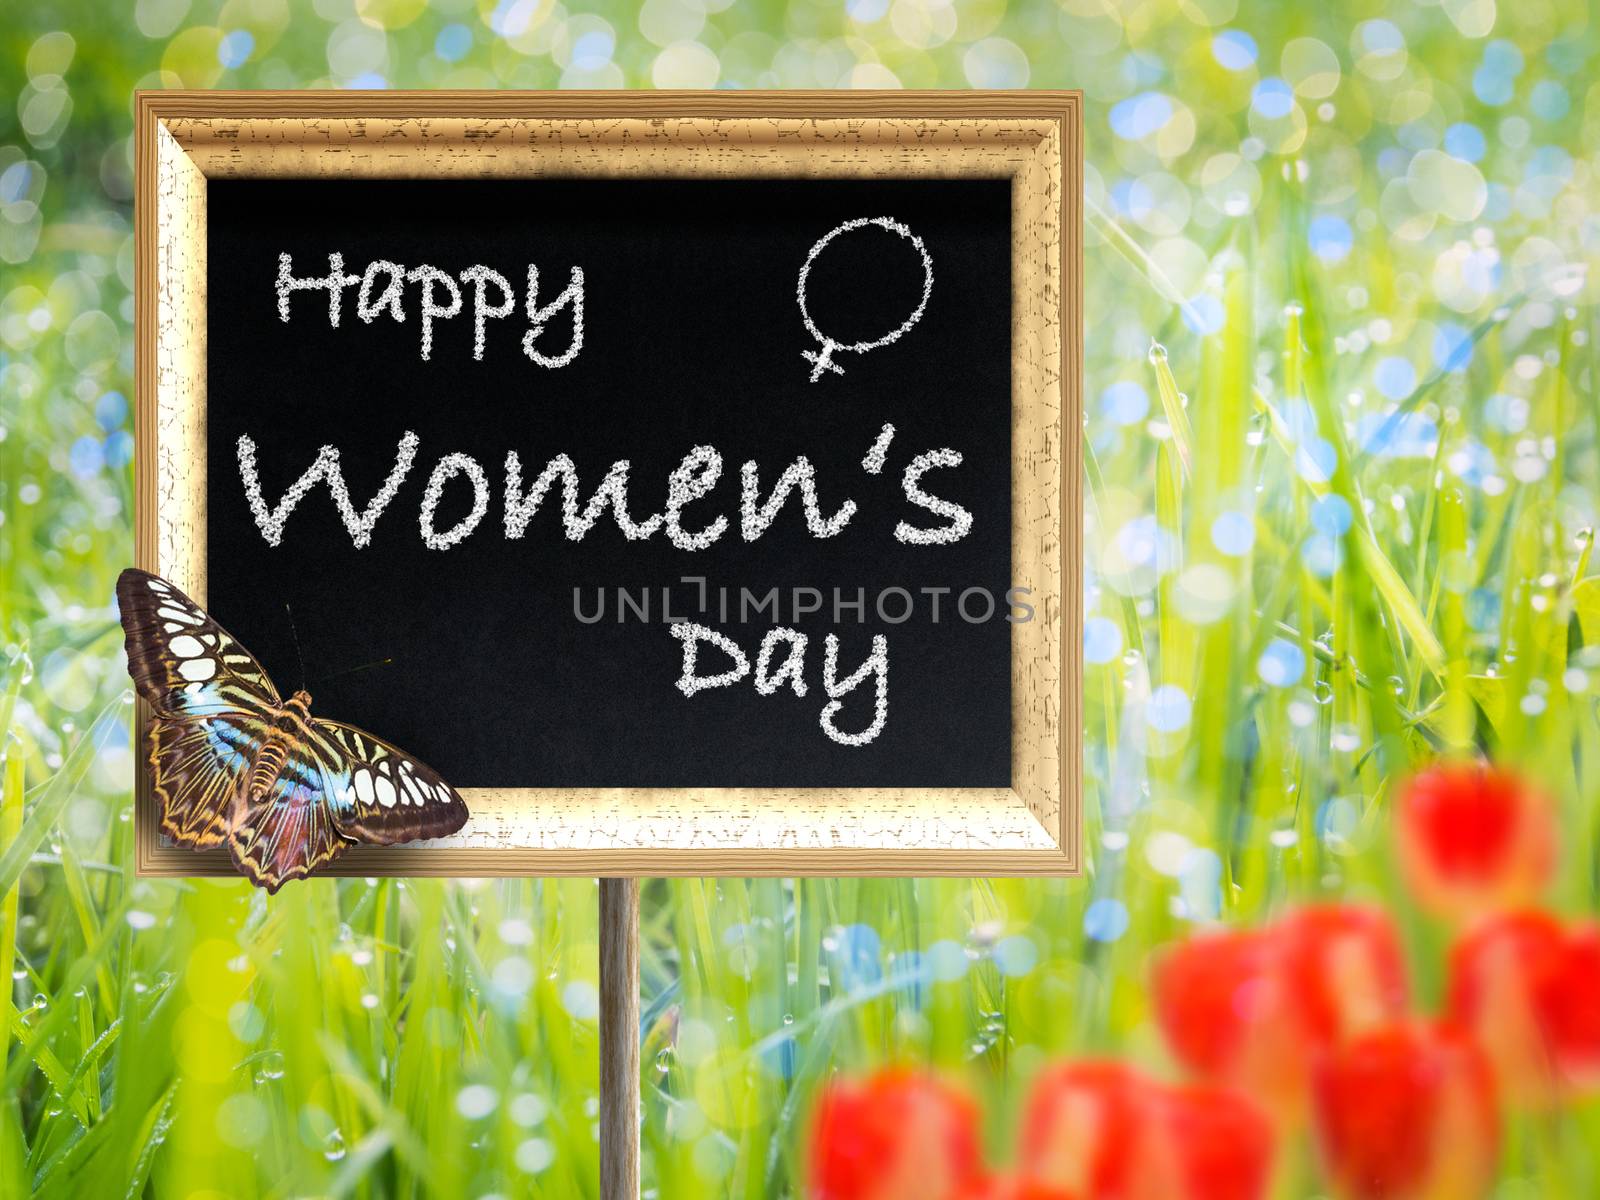 Black chalkboard with text Happy women's day by w20er